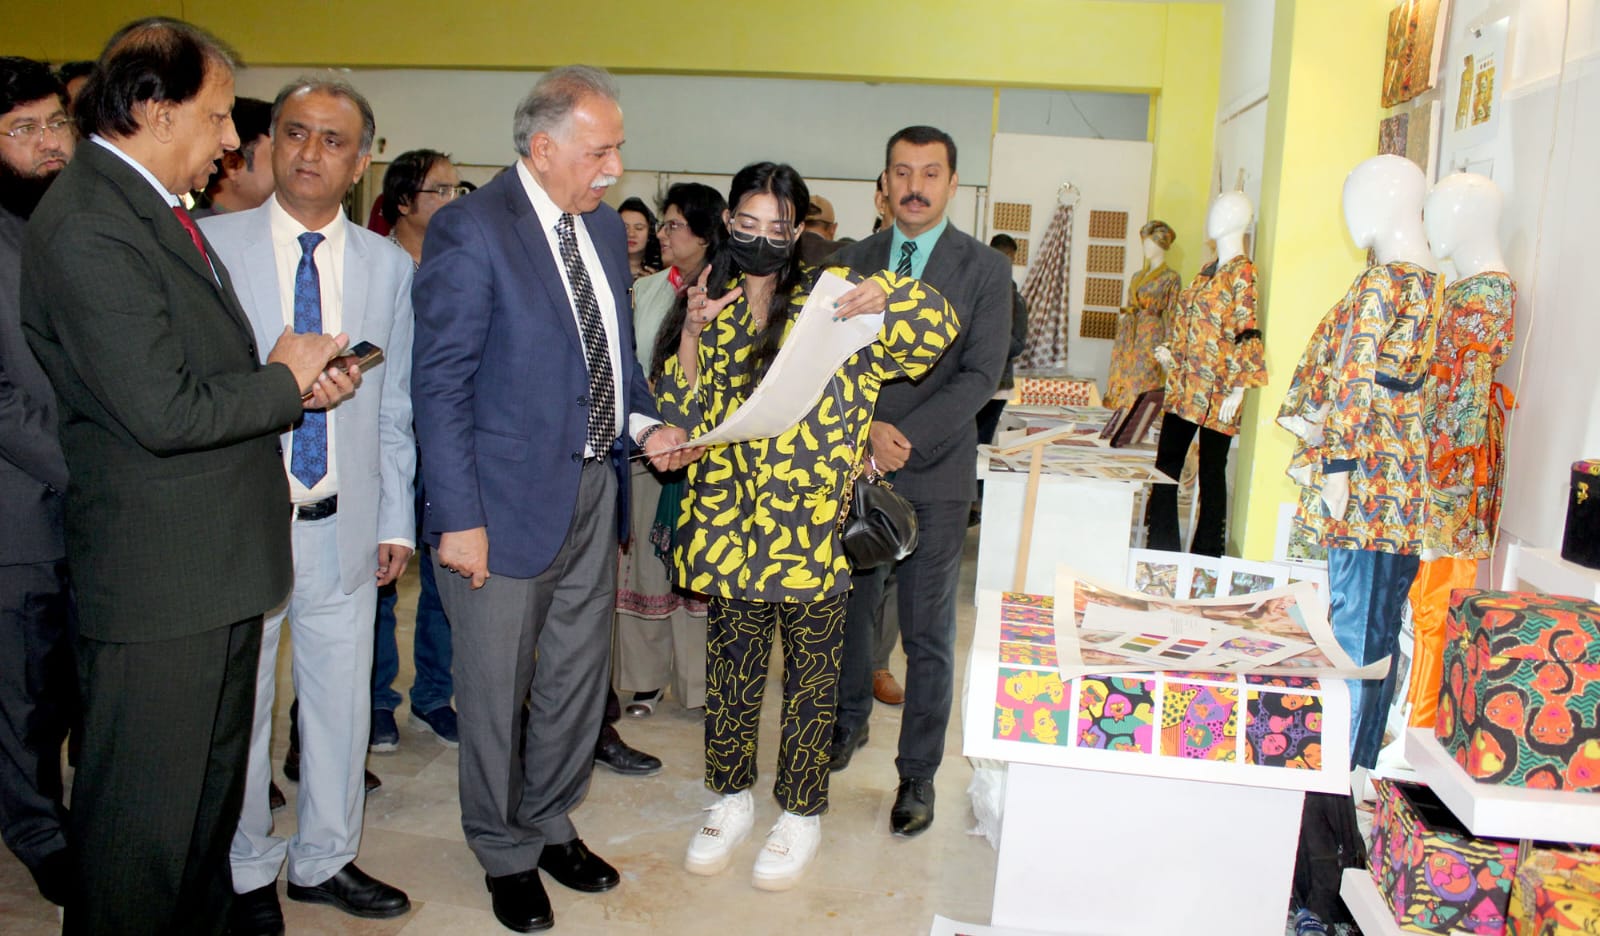 Sindh-University-Thesis-Exhibition-Sindh Courier-2